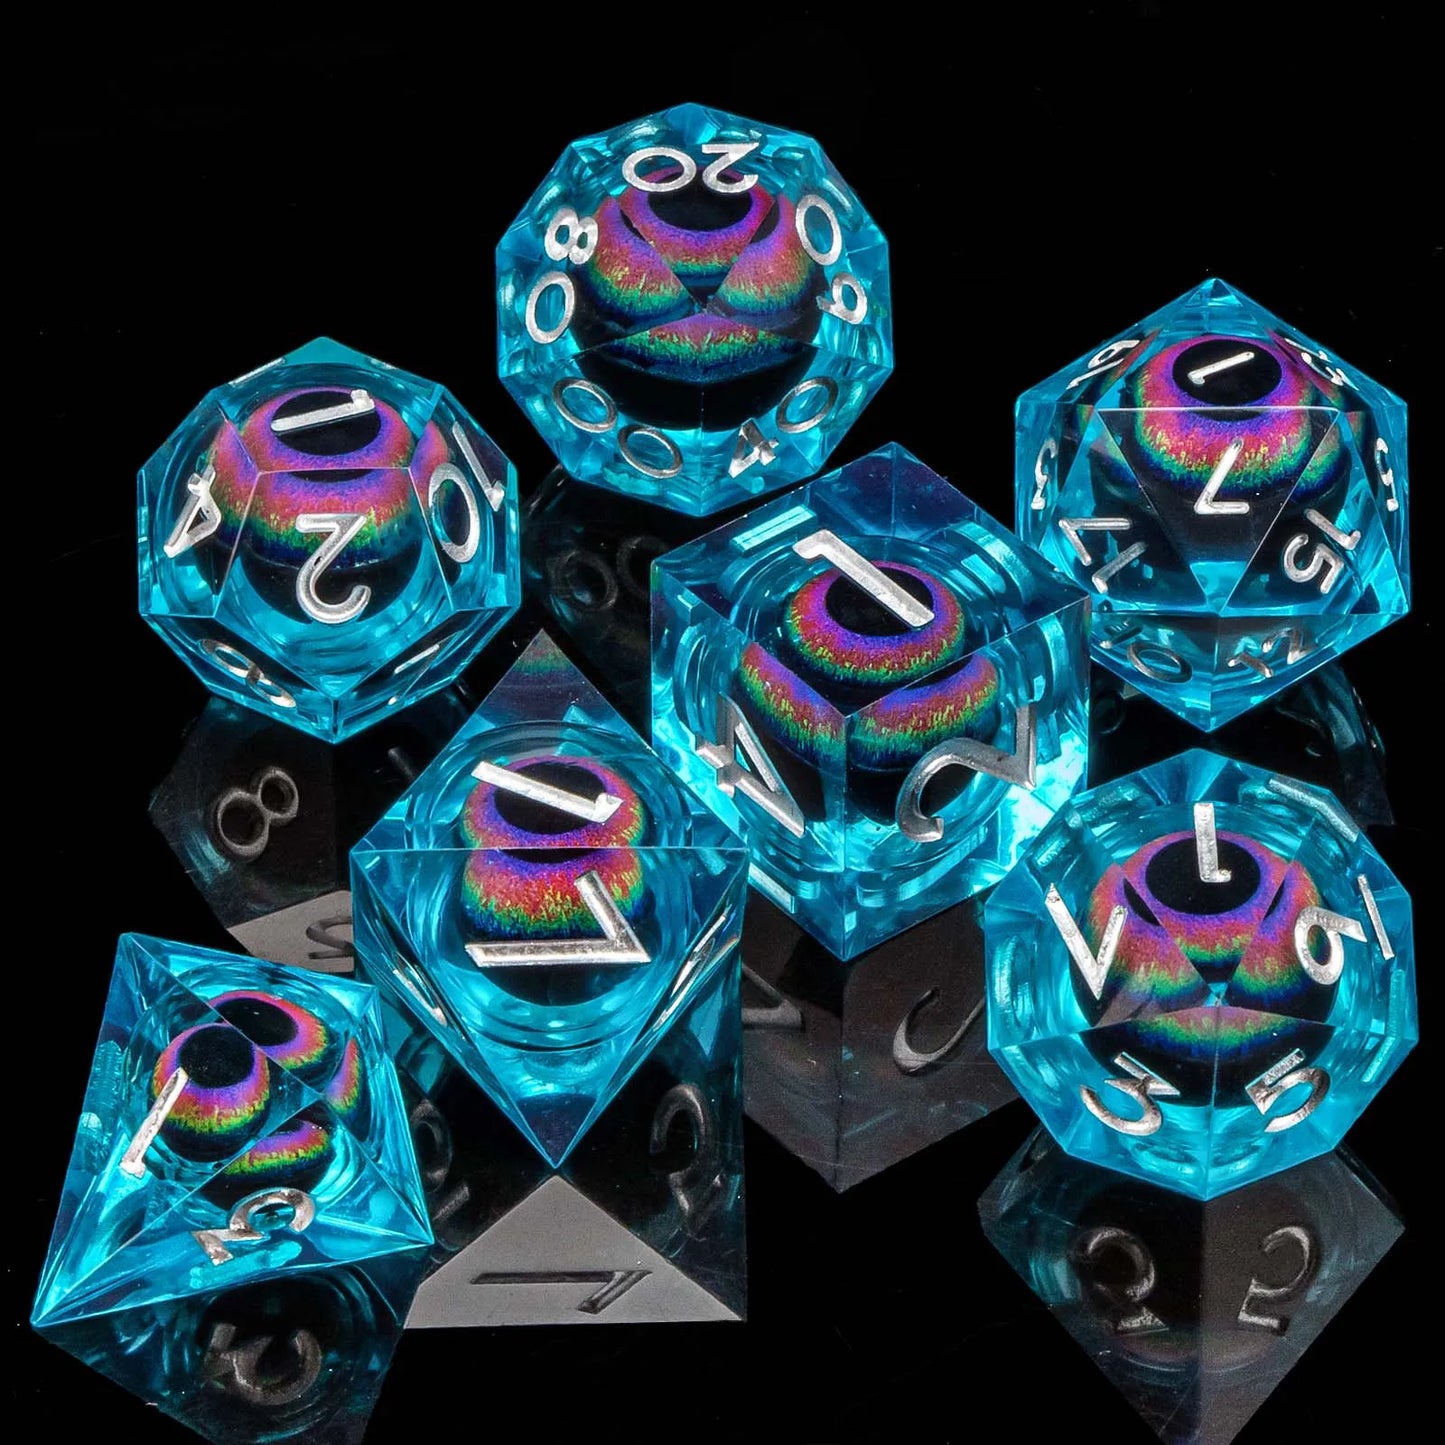 DND Eye Liquid Flow Core Resin D&D Dice Set For D and D Dungeon and Dragon Pathfinder Table Role Playing Game Polyhedral Dice AZ03